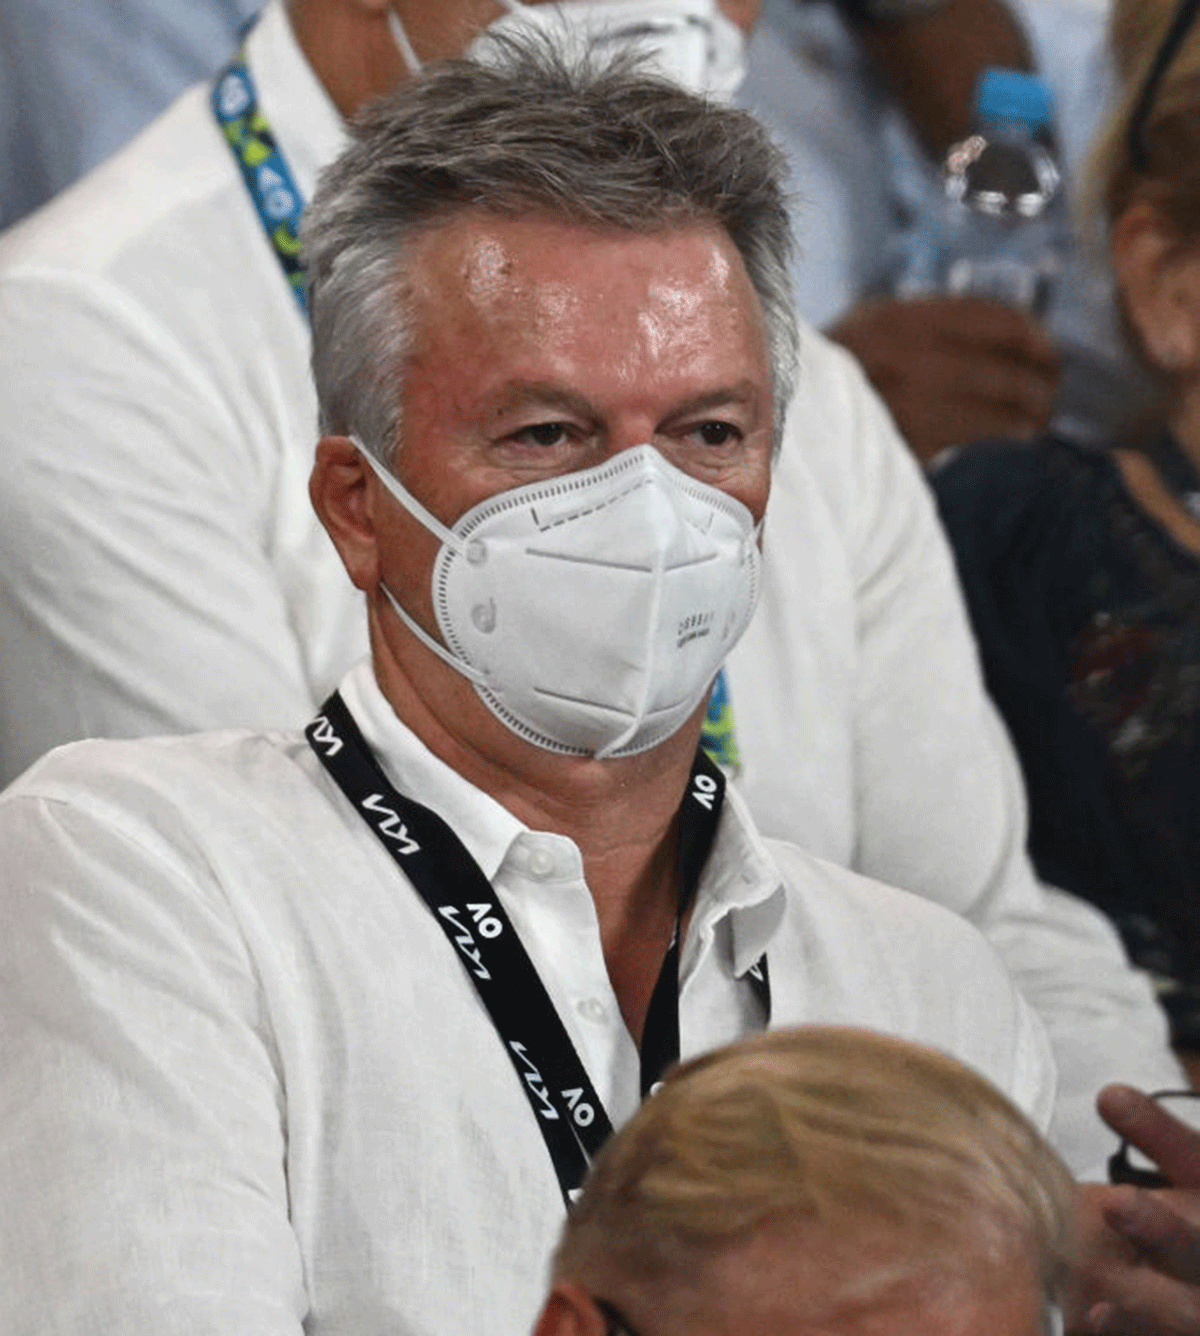 Former Australian cricketer Steve Waugh watches the Australian Open semi-final between Daniil Medvedev of Russia and Stefanos Tsitsipas of Greece at Melbourne Park on Friday